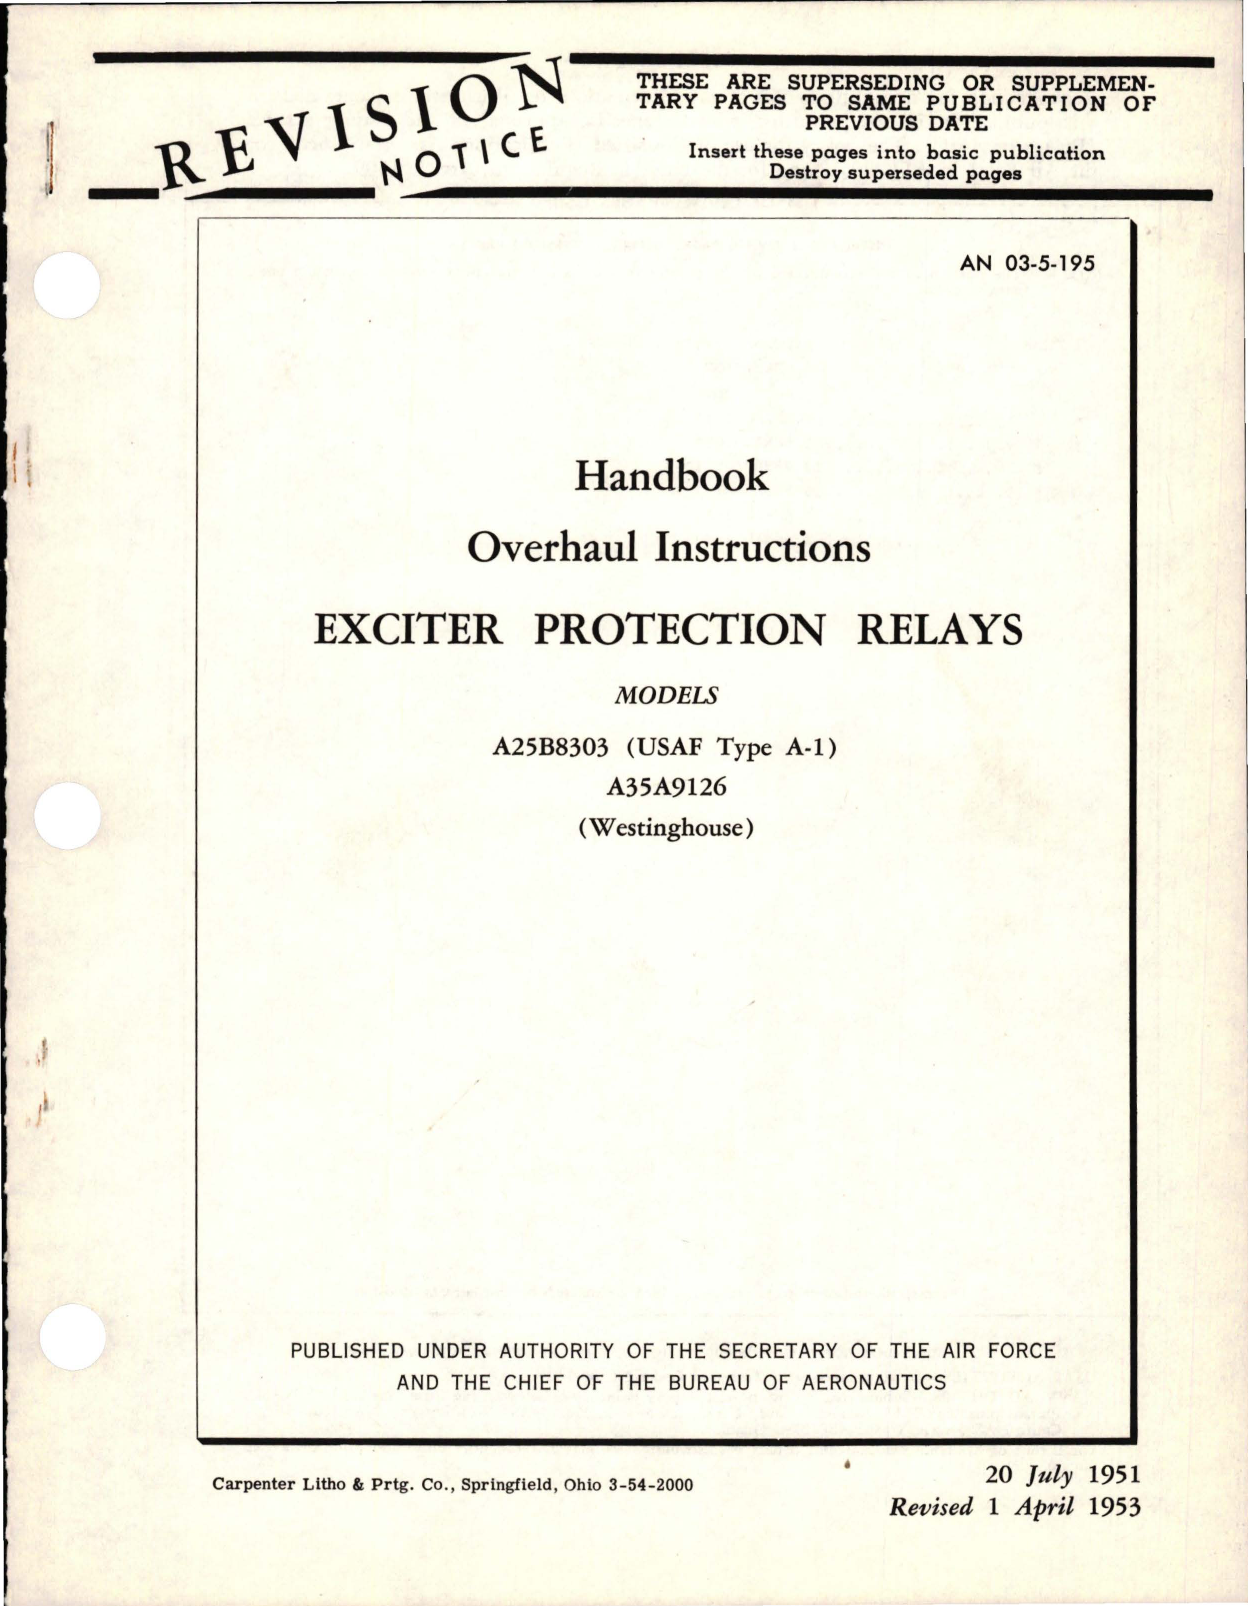 Sample page 1 from AirCorps Library document: Overhaul Instructions for Exciter Protection Relays - Models A25B303 (USAF Type A-1) and A35A9126 